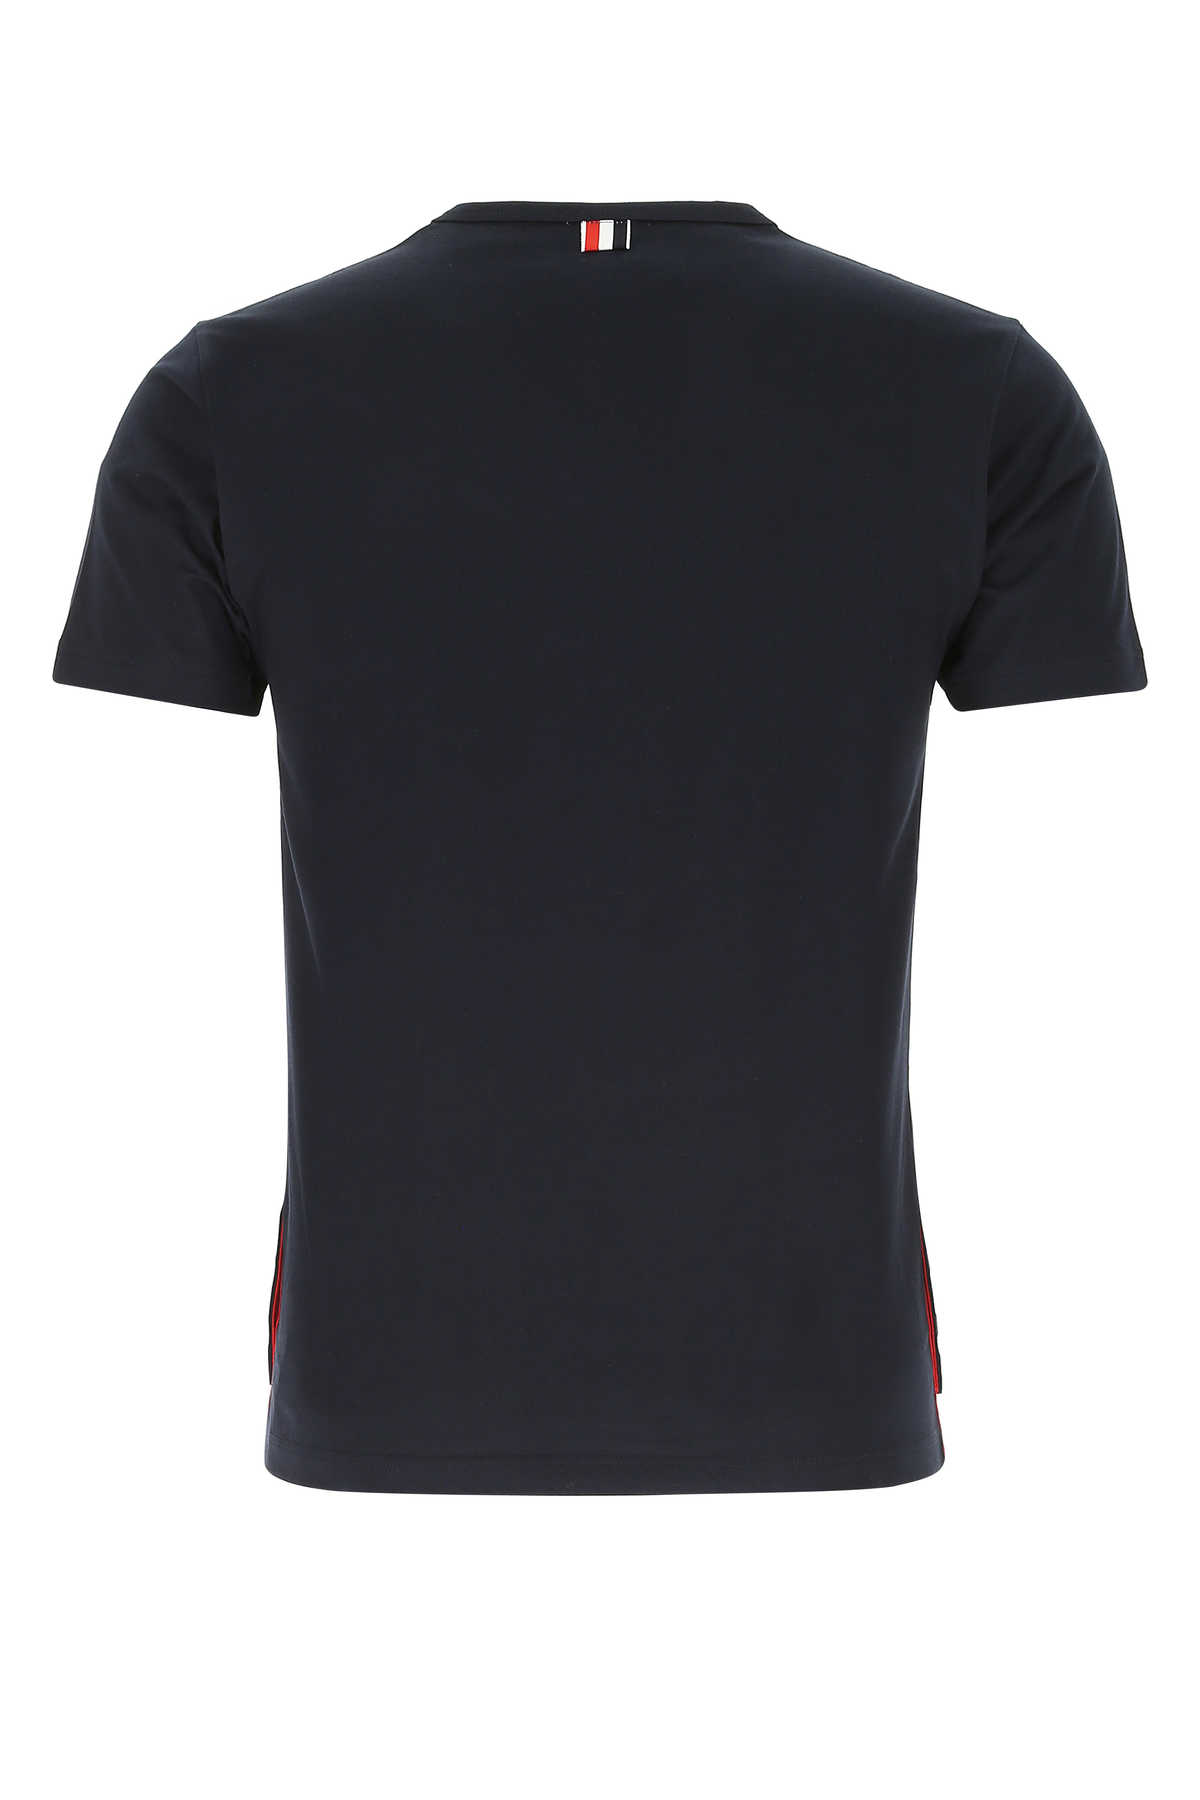 Thom Browne Midnight Blue Cotton T-shirt In 415